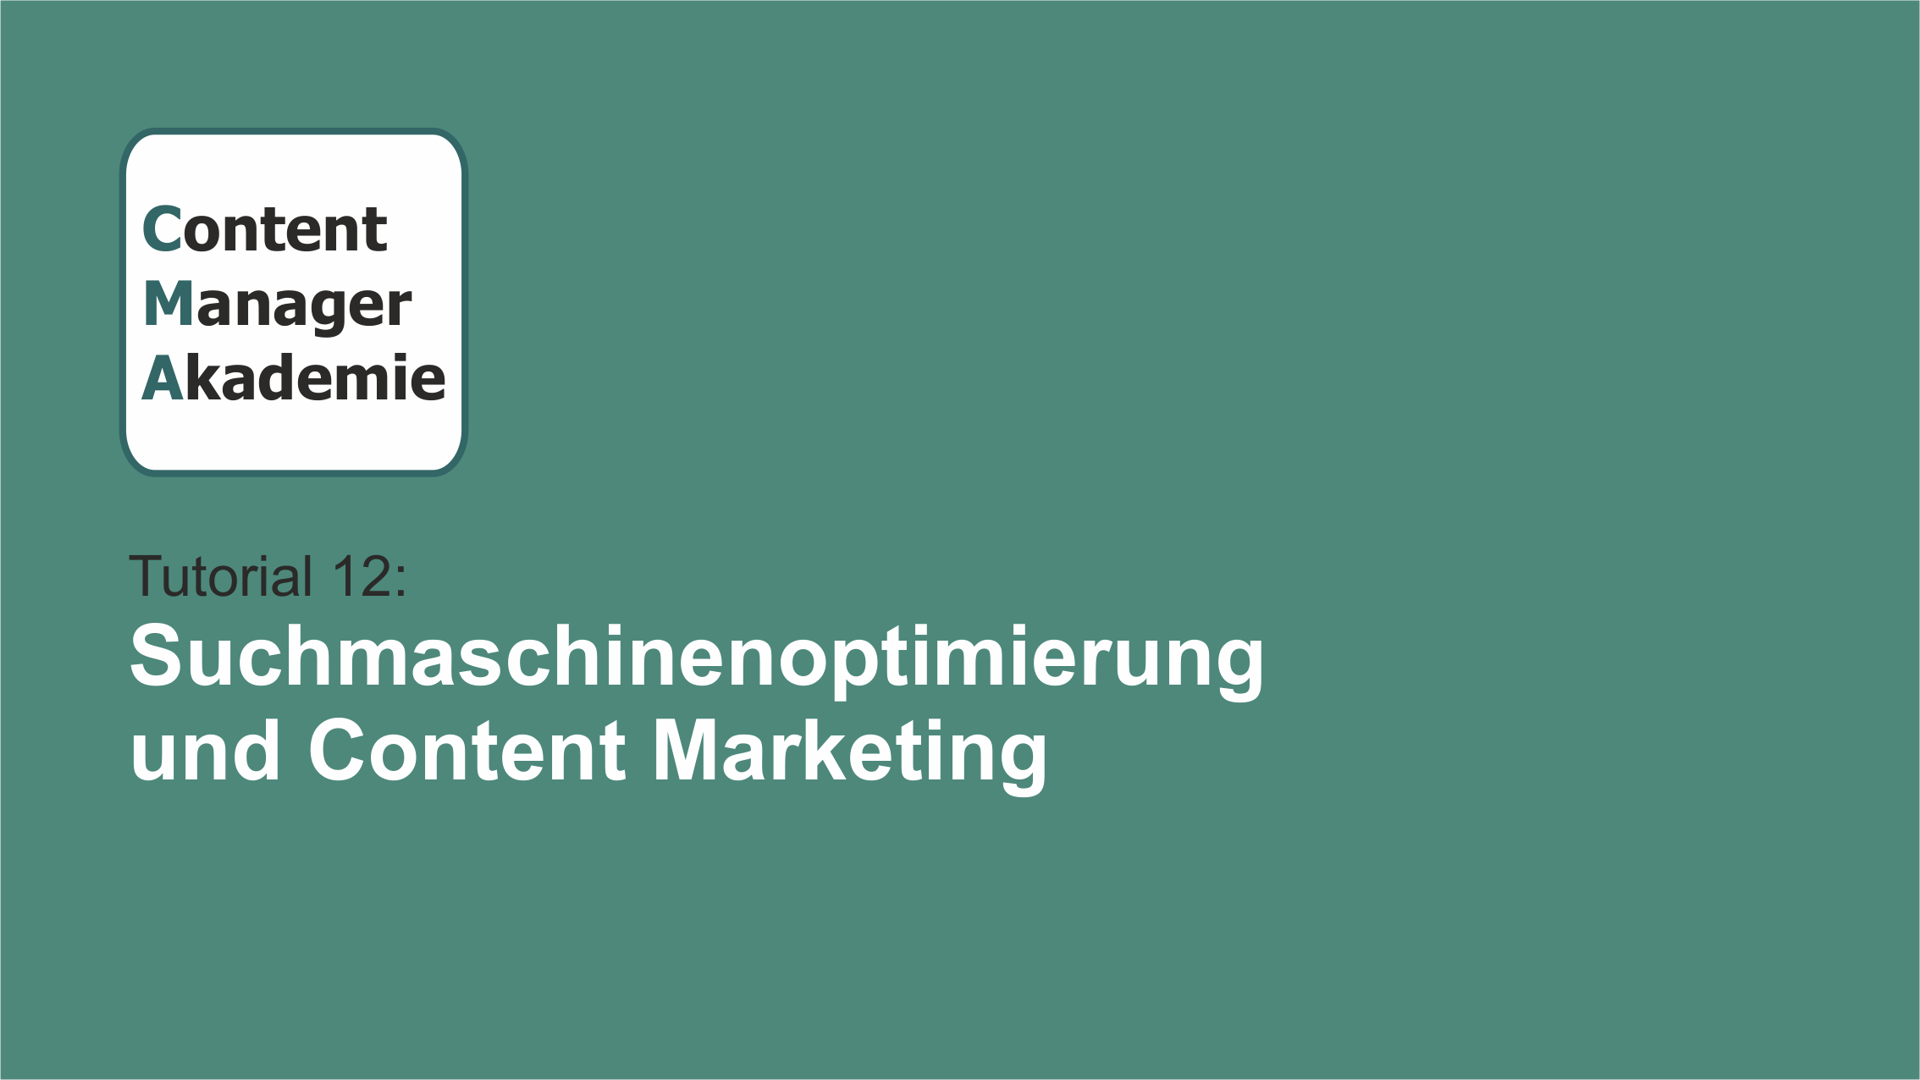 Content Manager Akademie Tutorial 12